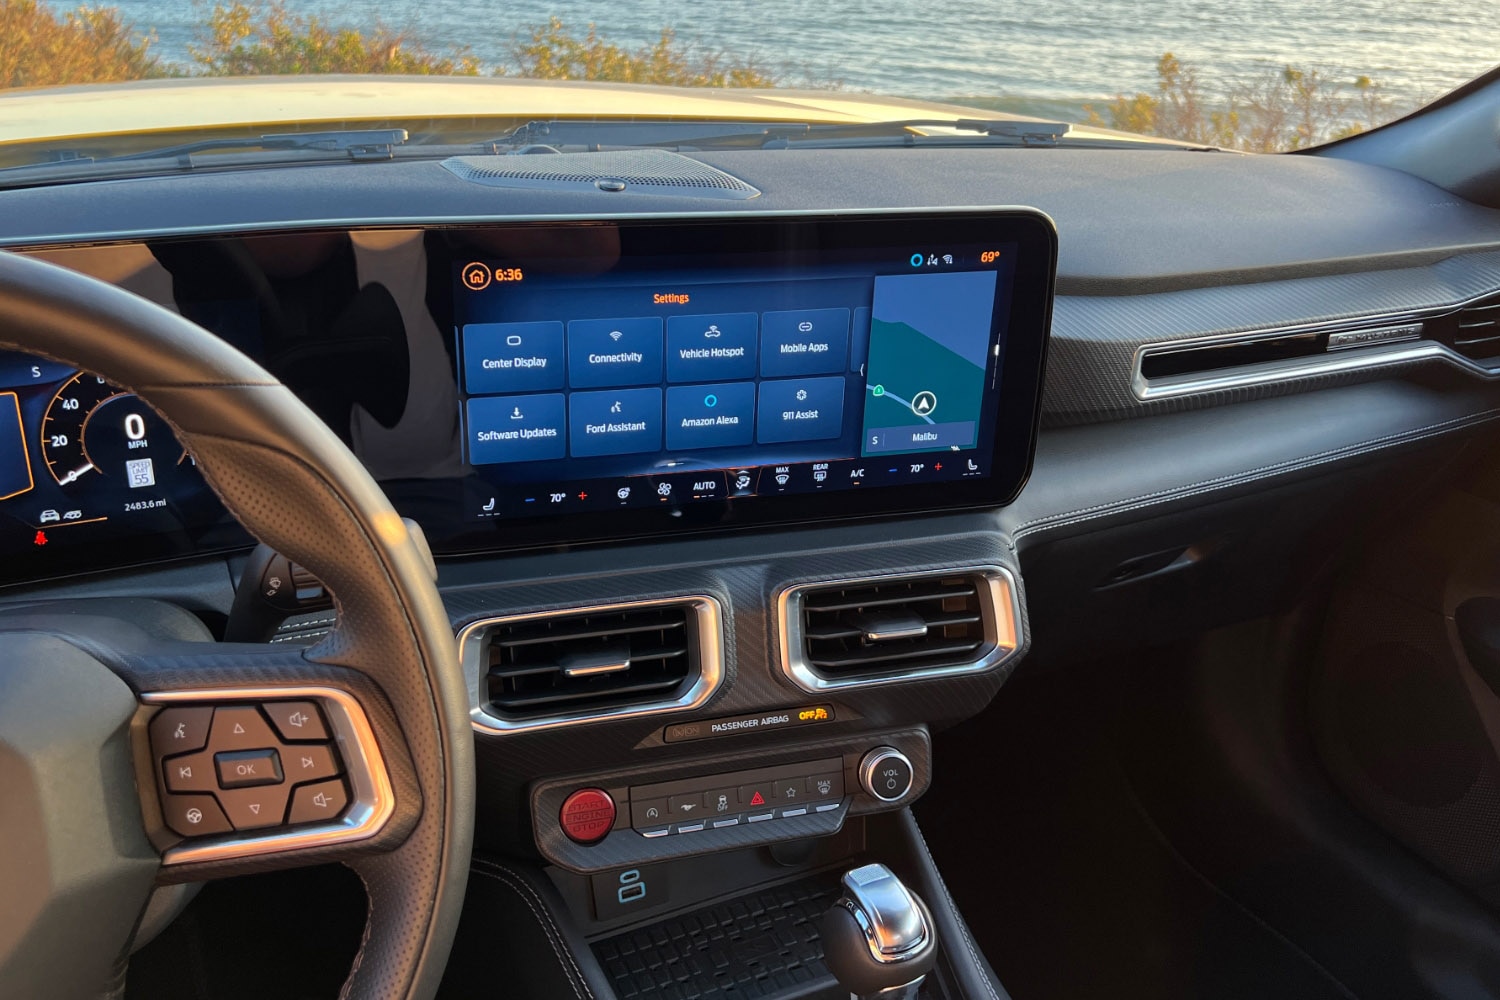 2024 Ford Mustang infotainment system display.